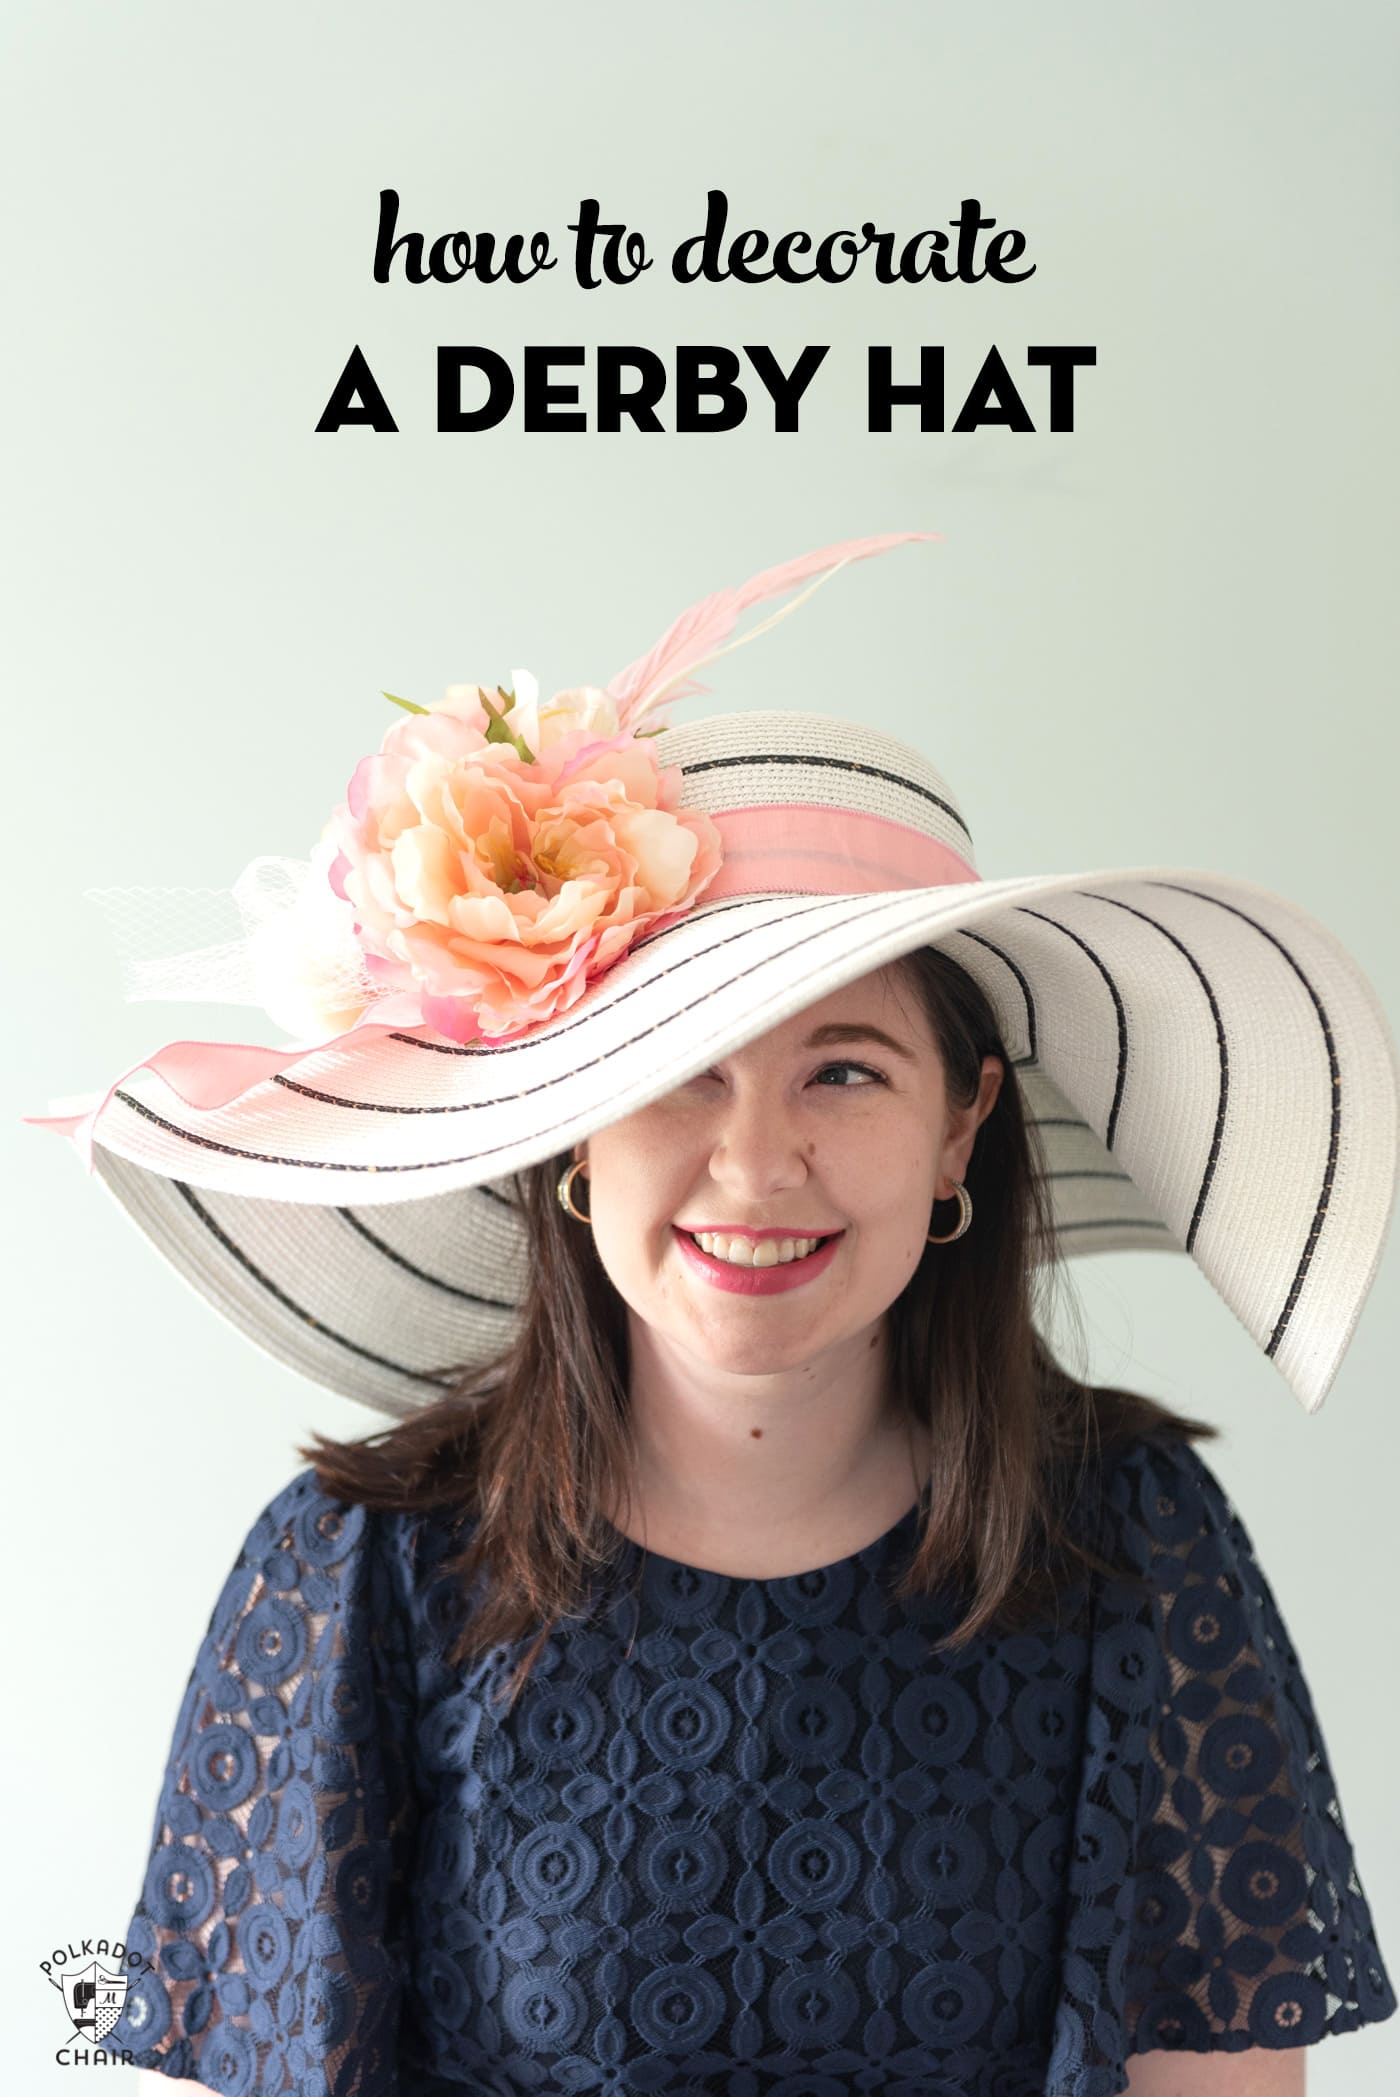 girl in white derby hat with pink flowers wearing a navy dress